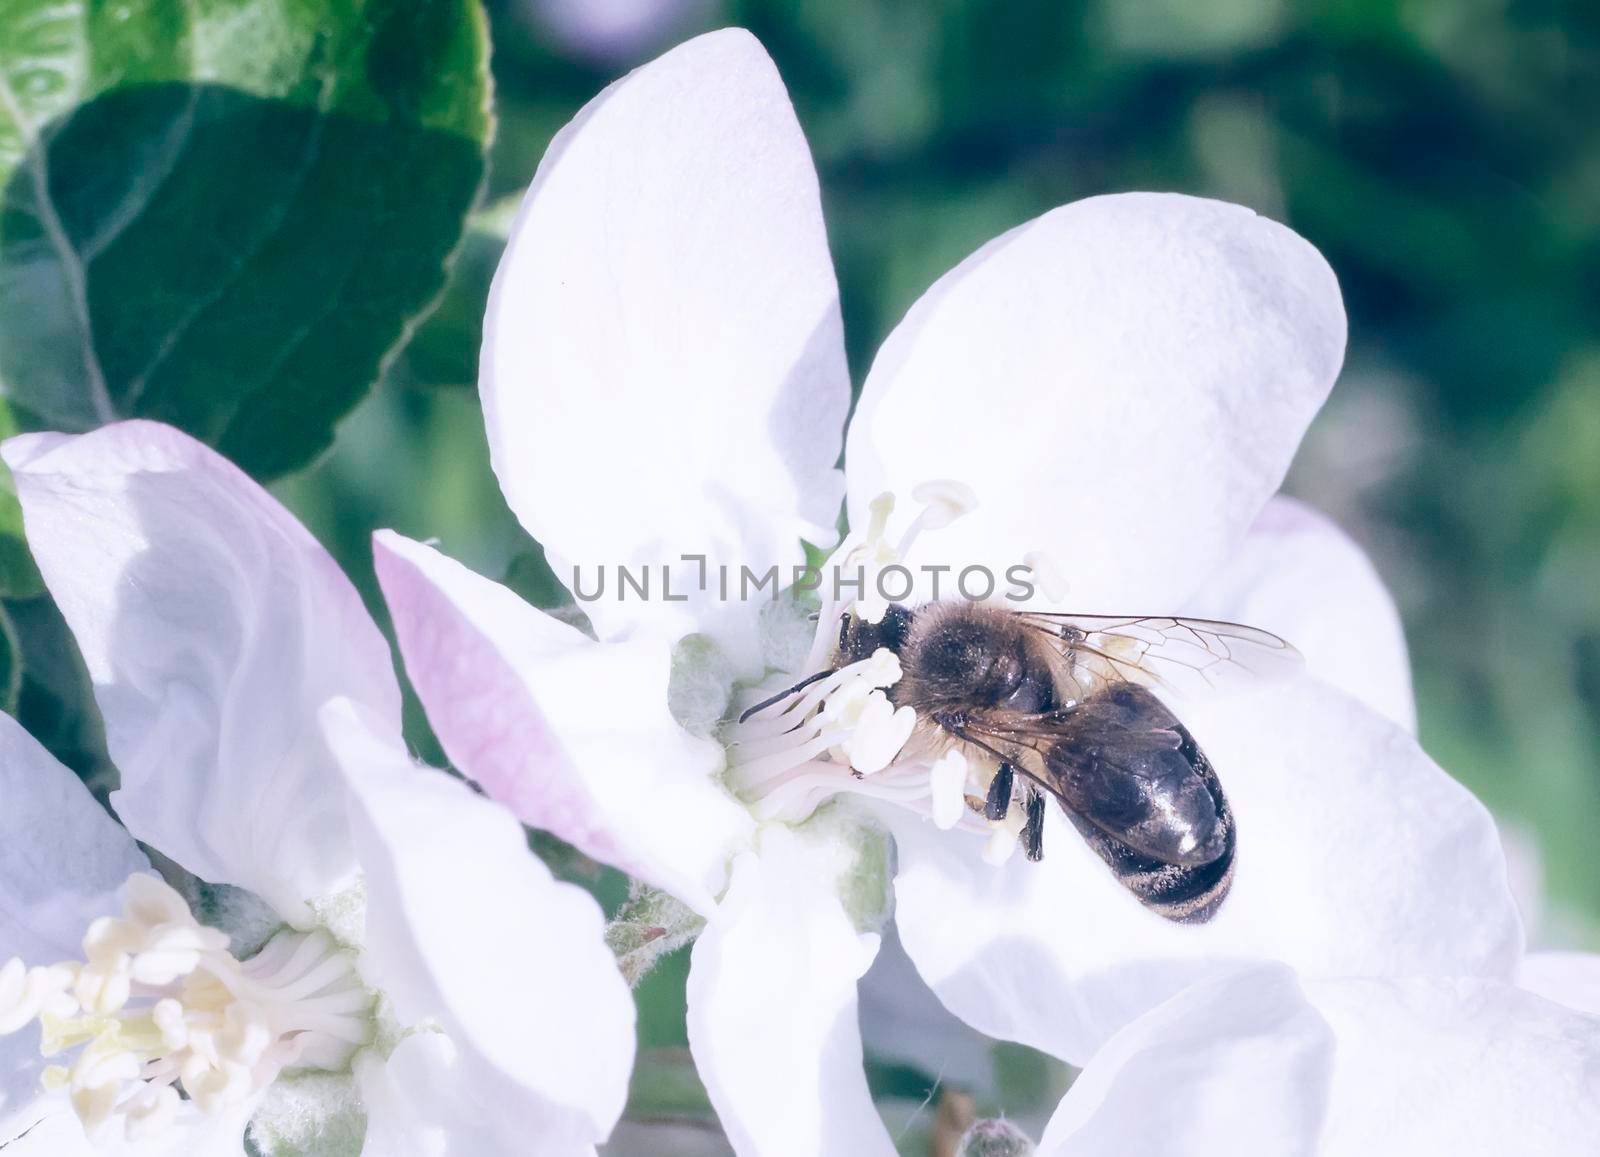 On the branch of a tree with lots of pink and white flowers and buds the bee in the center of the flower collecting nectar.